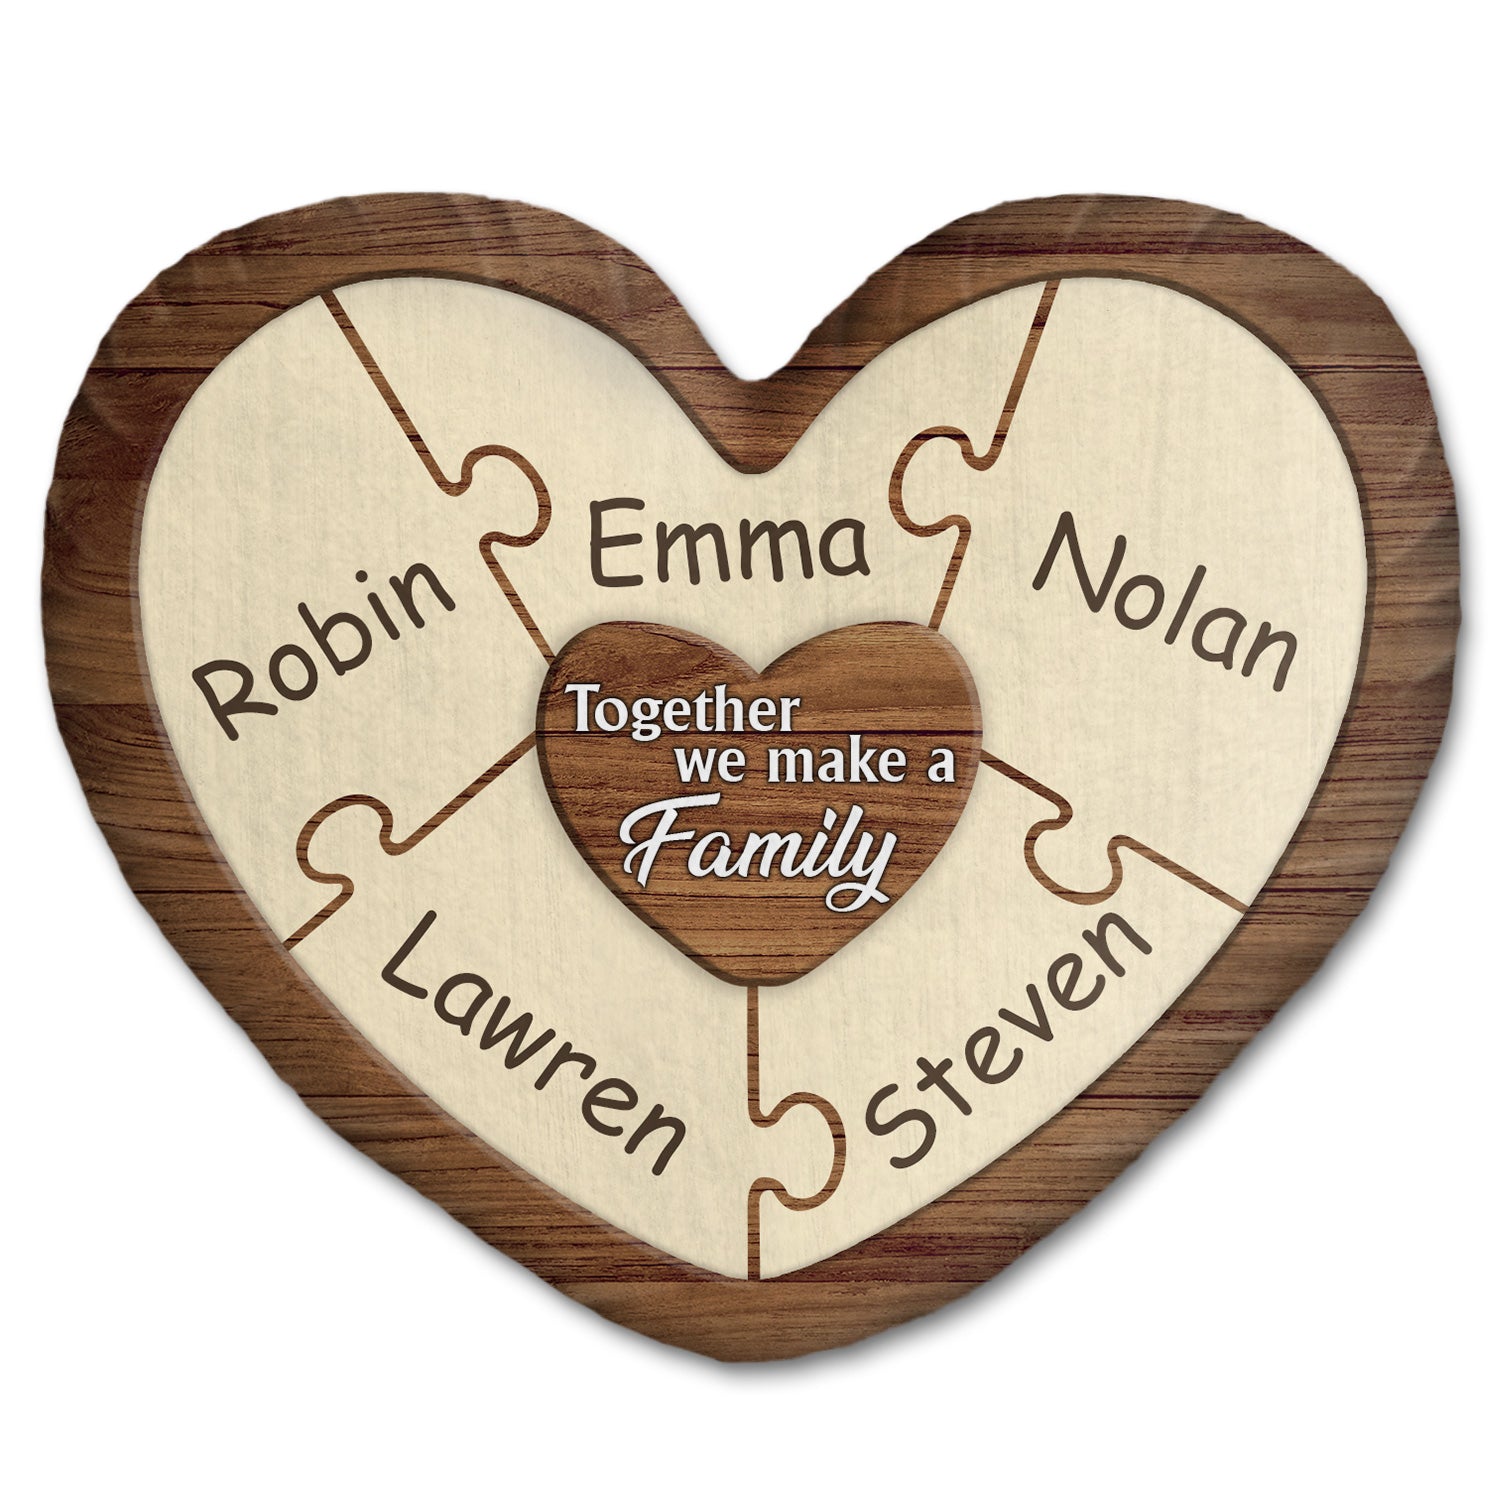 Together We Make A Family - Birthday, Holiday Gift For Parent, Couple, Grandparent - Personalized Heart Shaped Pillow